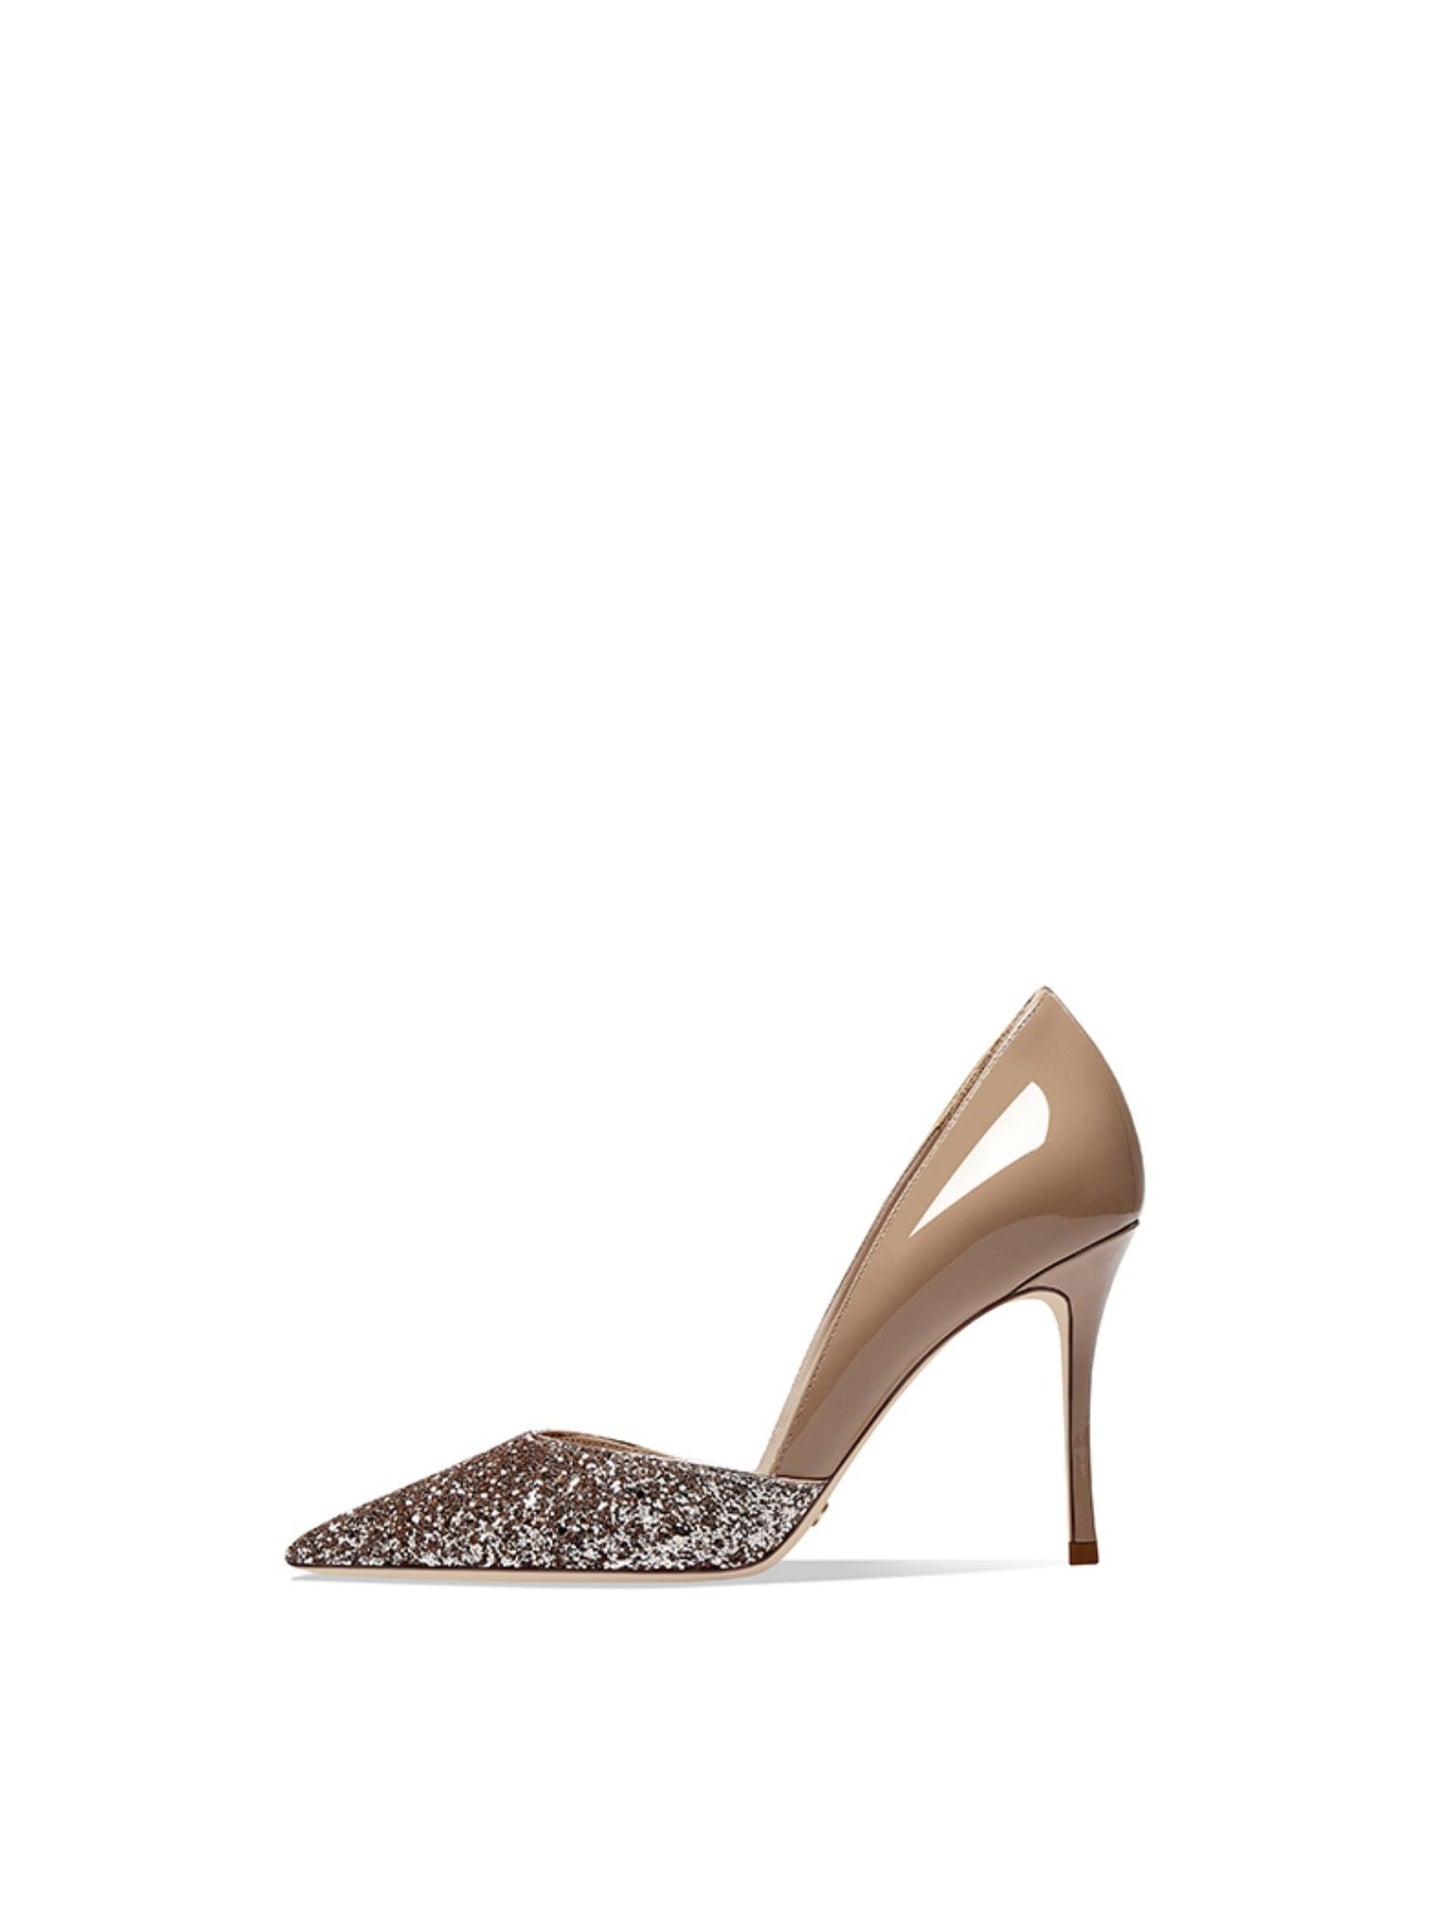 pointed toe and shallow mouth crafted with a nude and sparkling crystals for a chic shoe- Cleo